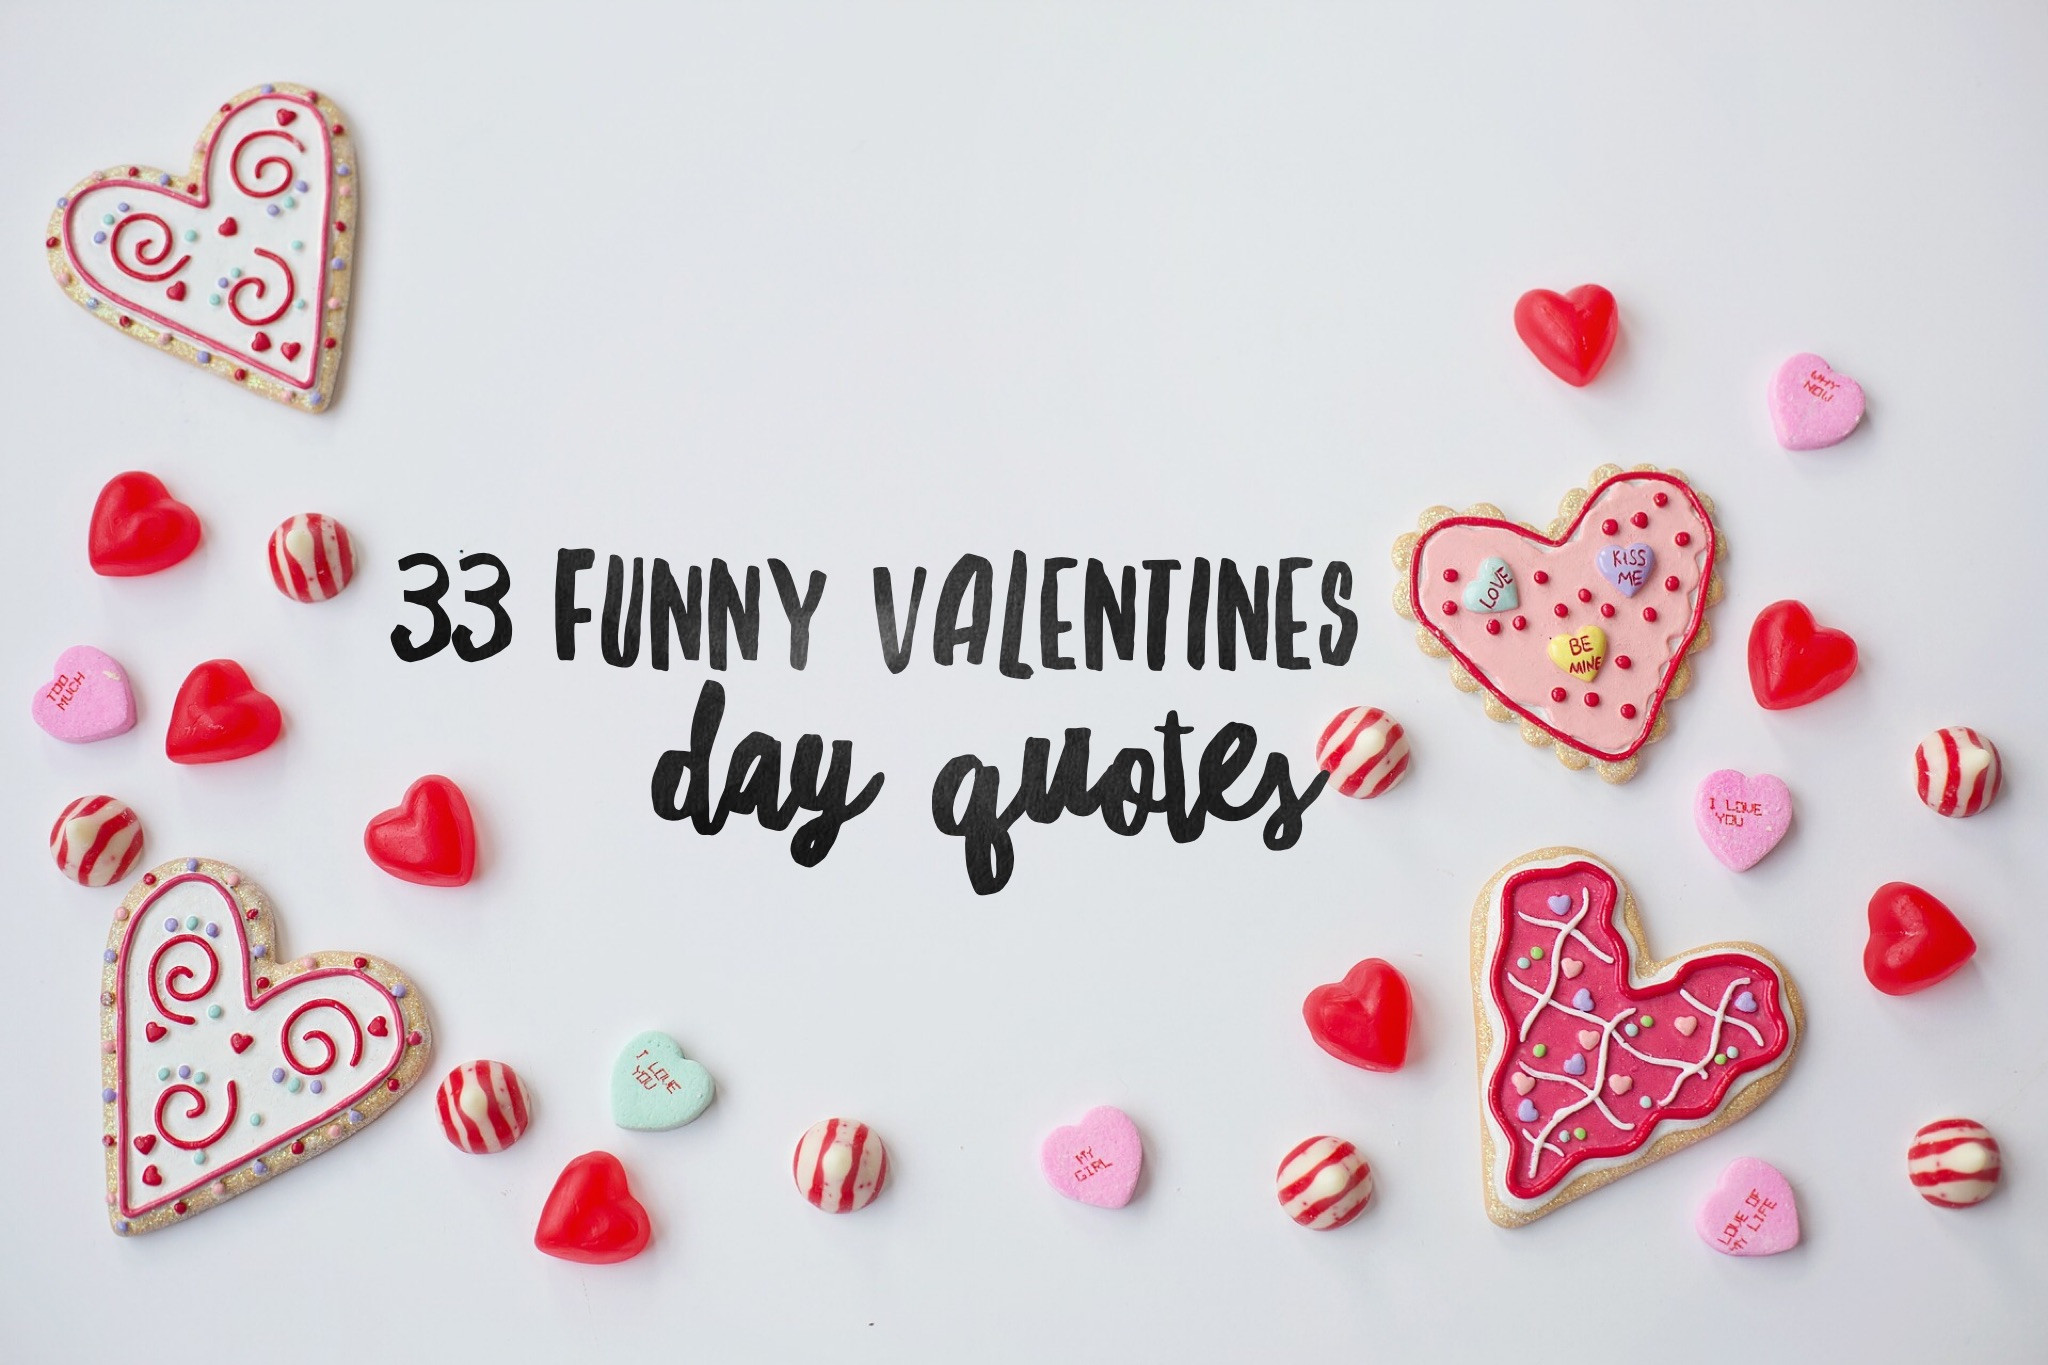 Stupid Valentines Day Quotes
 33 Funny Valentines Day Quotes